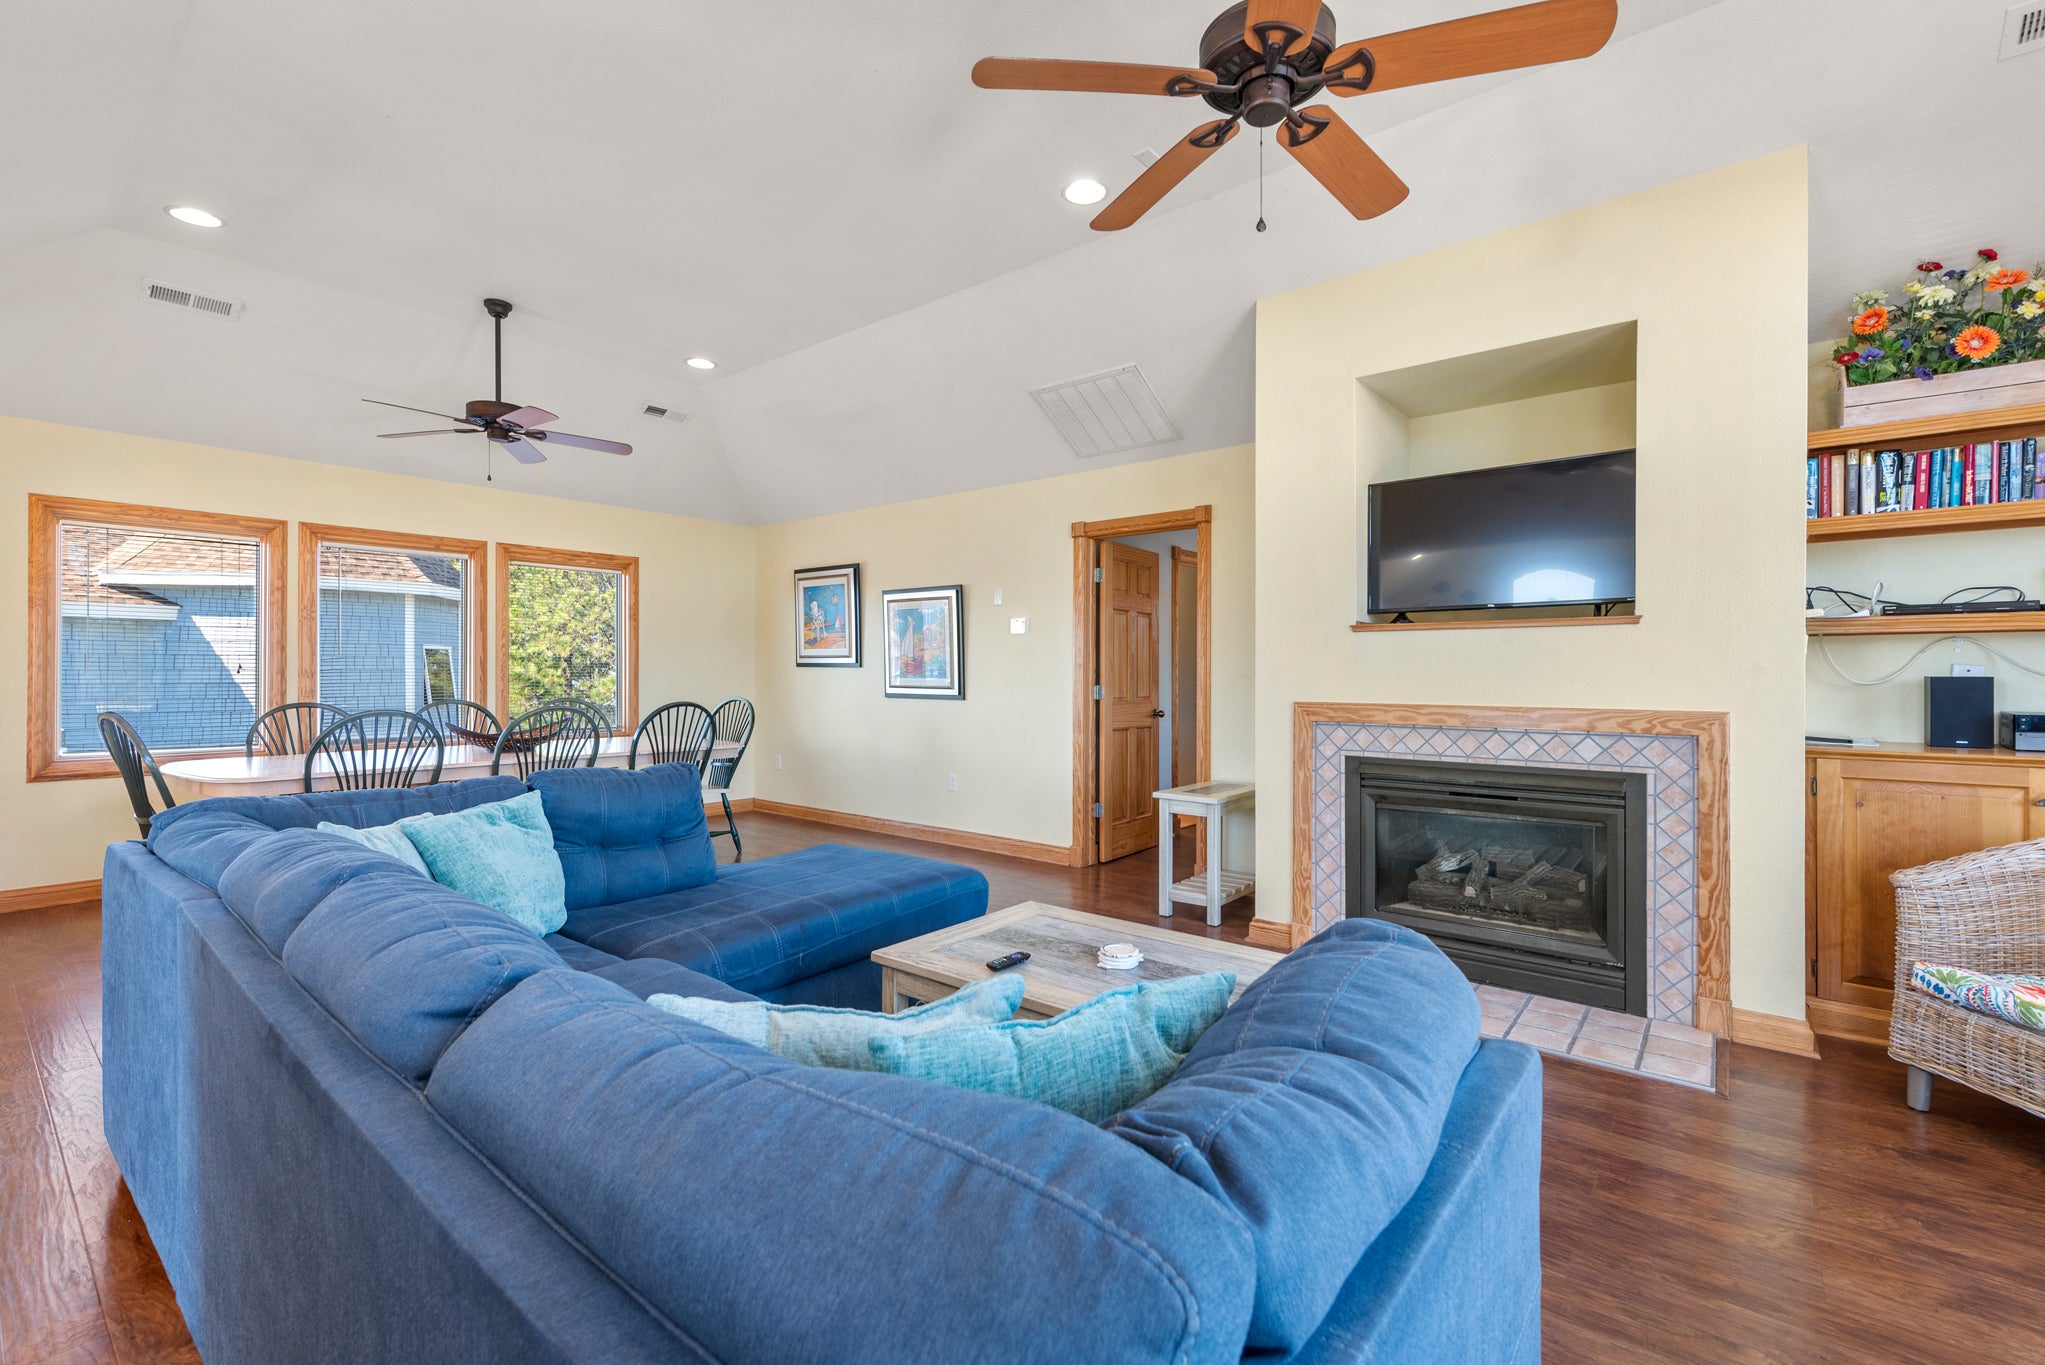 M849: Beach Time Out | Top Level Living Area - Fireplace Not Available For Guest Use